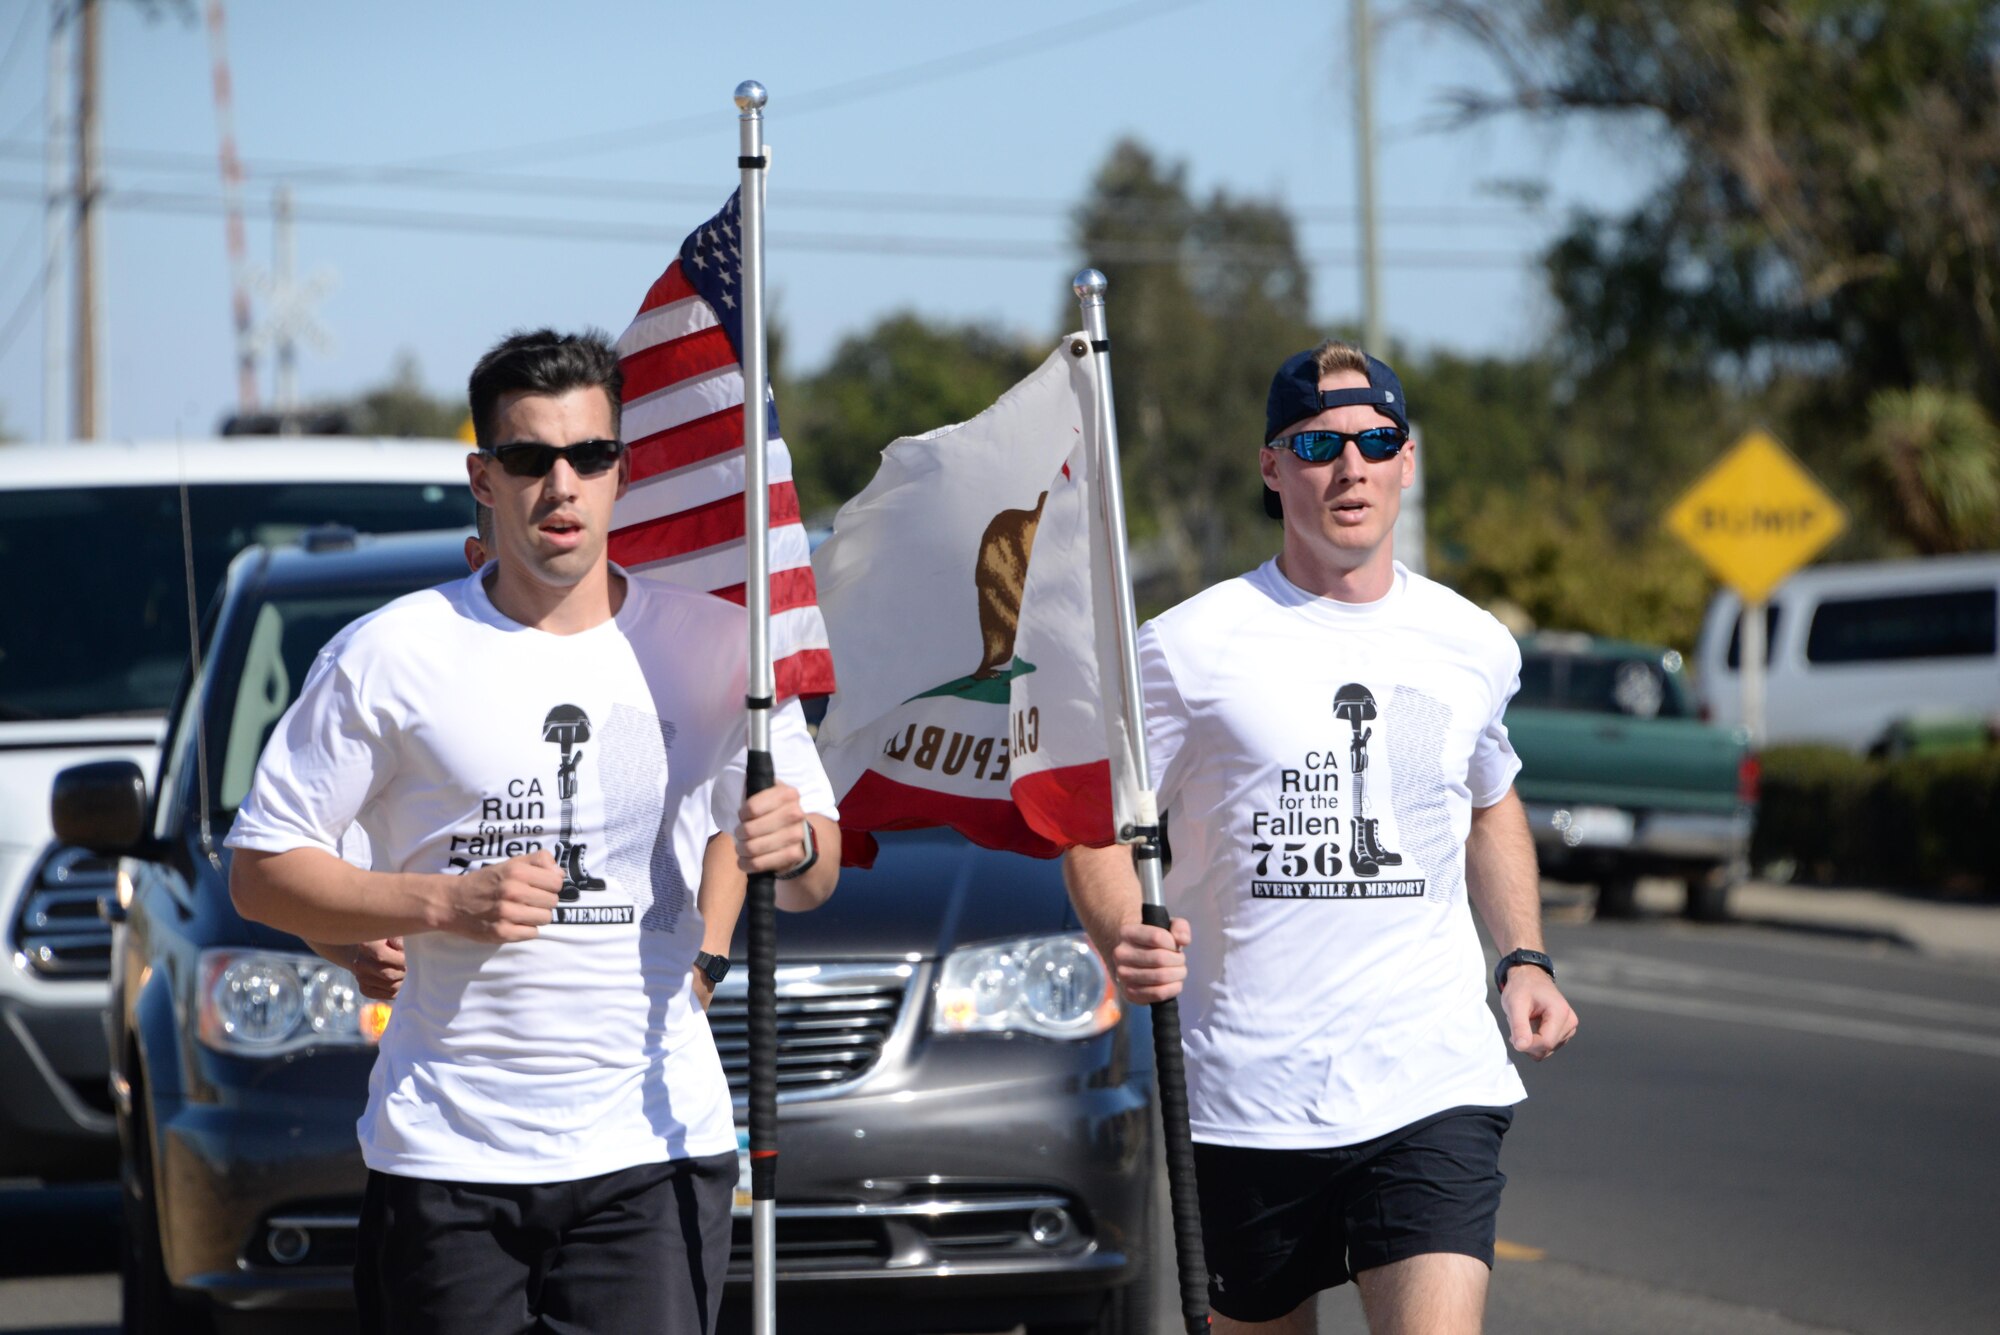 Airmen from the 60th Air Mobility Wing at Travis Air Force Base participate in the California Run for the Fallen on Sept. 23, 2016.  The run raises awareness for California service members who were killed in action after Sept. 11, 2001, rejuvenating their memories and keeping their spirits alive. (U.S. Air Force photo by 2nd Lt Geneva Croxton)